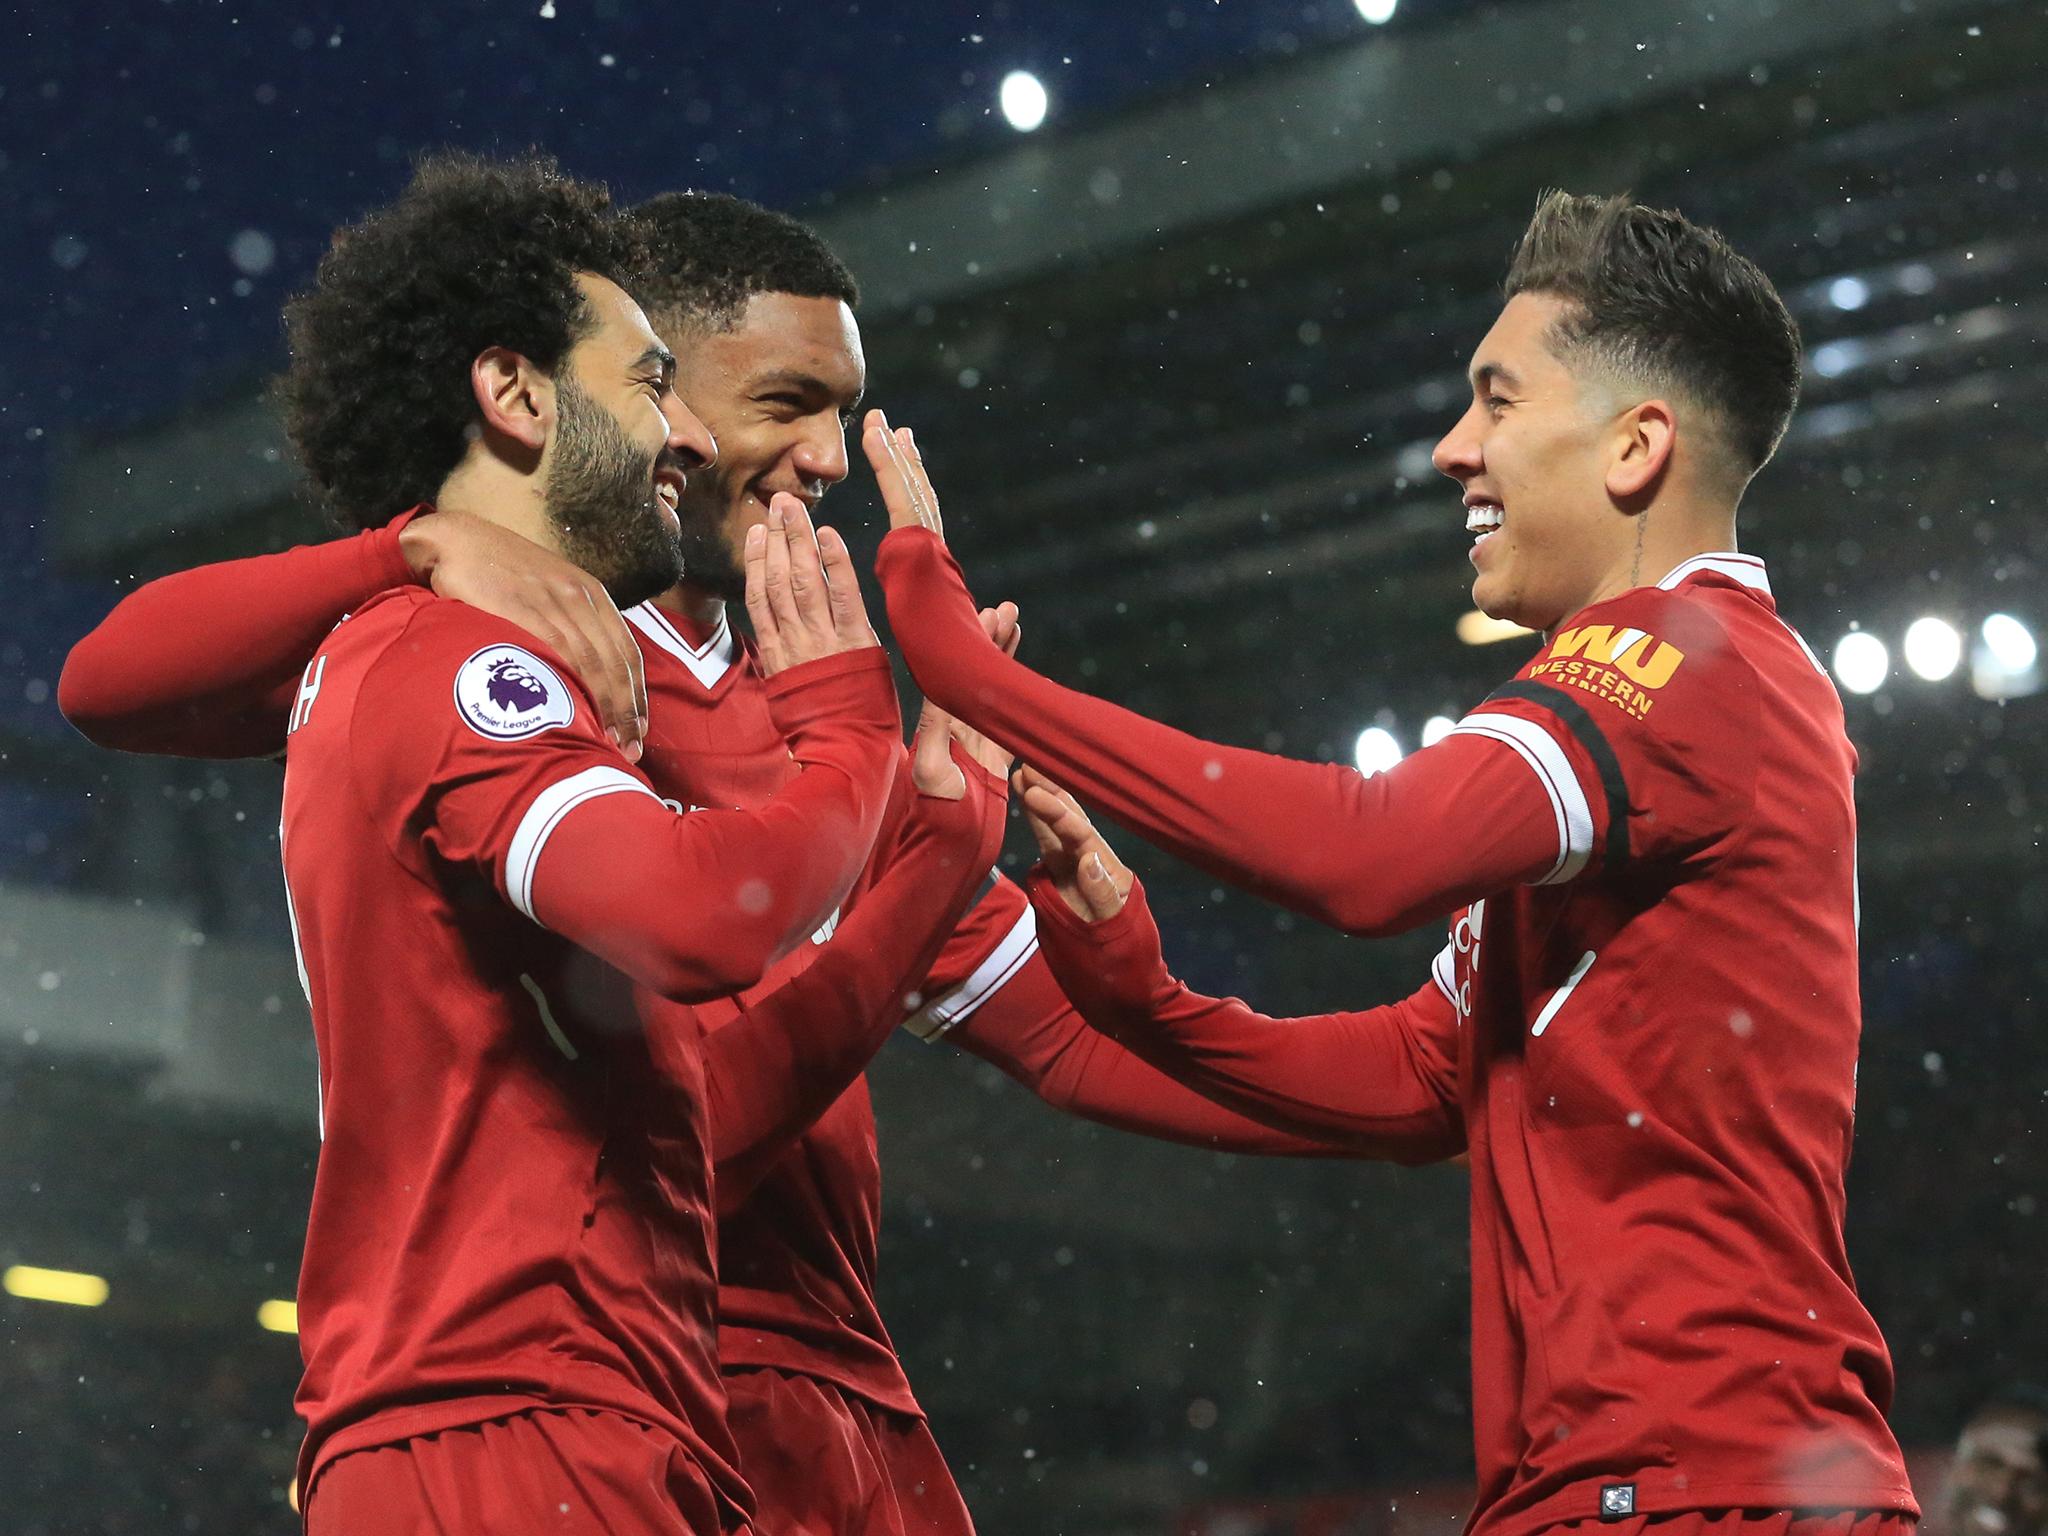 Roberto Firmino does not feel any extra pressure over Mohamed Salah's incredible goalscoring run